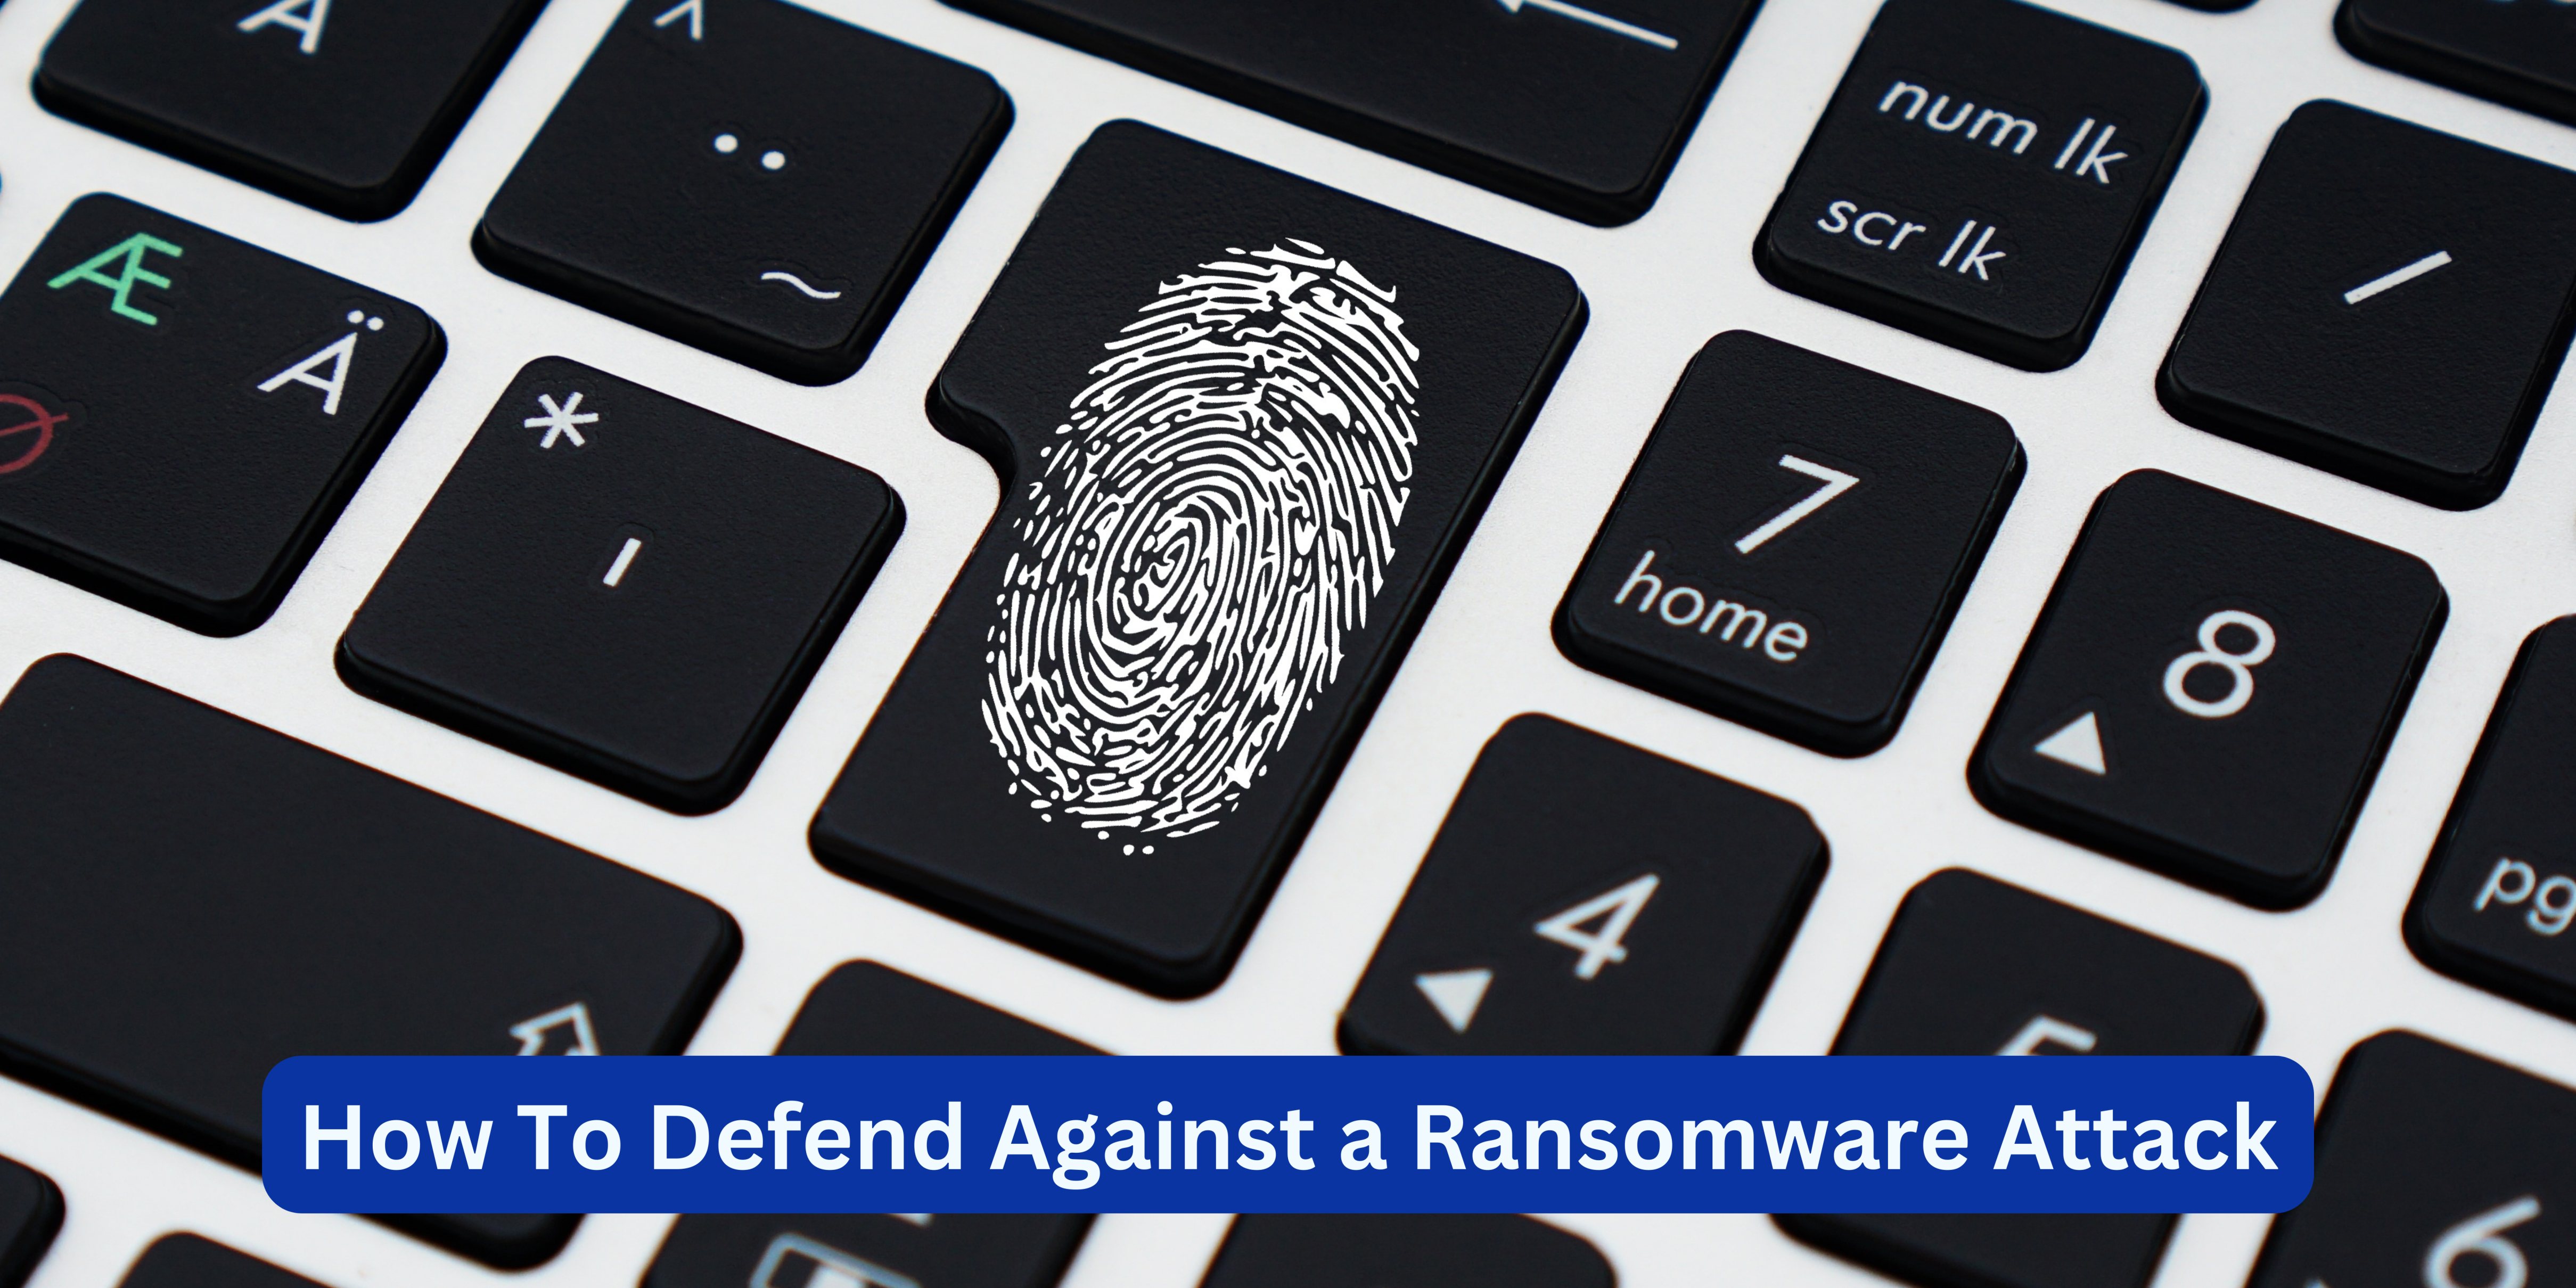 How To Defend Against a Ransomware Attack